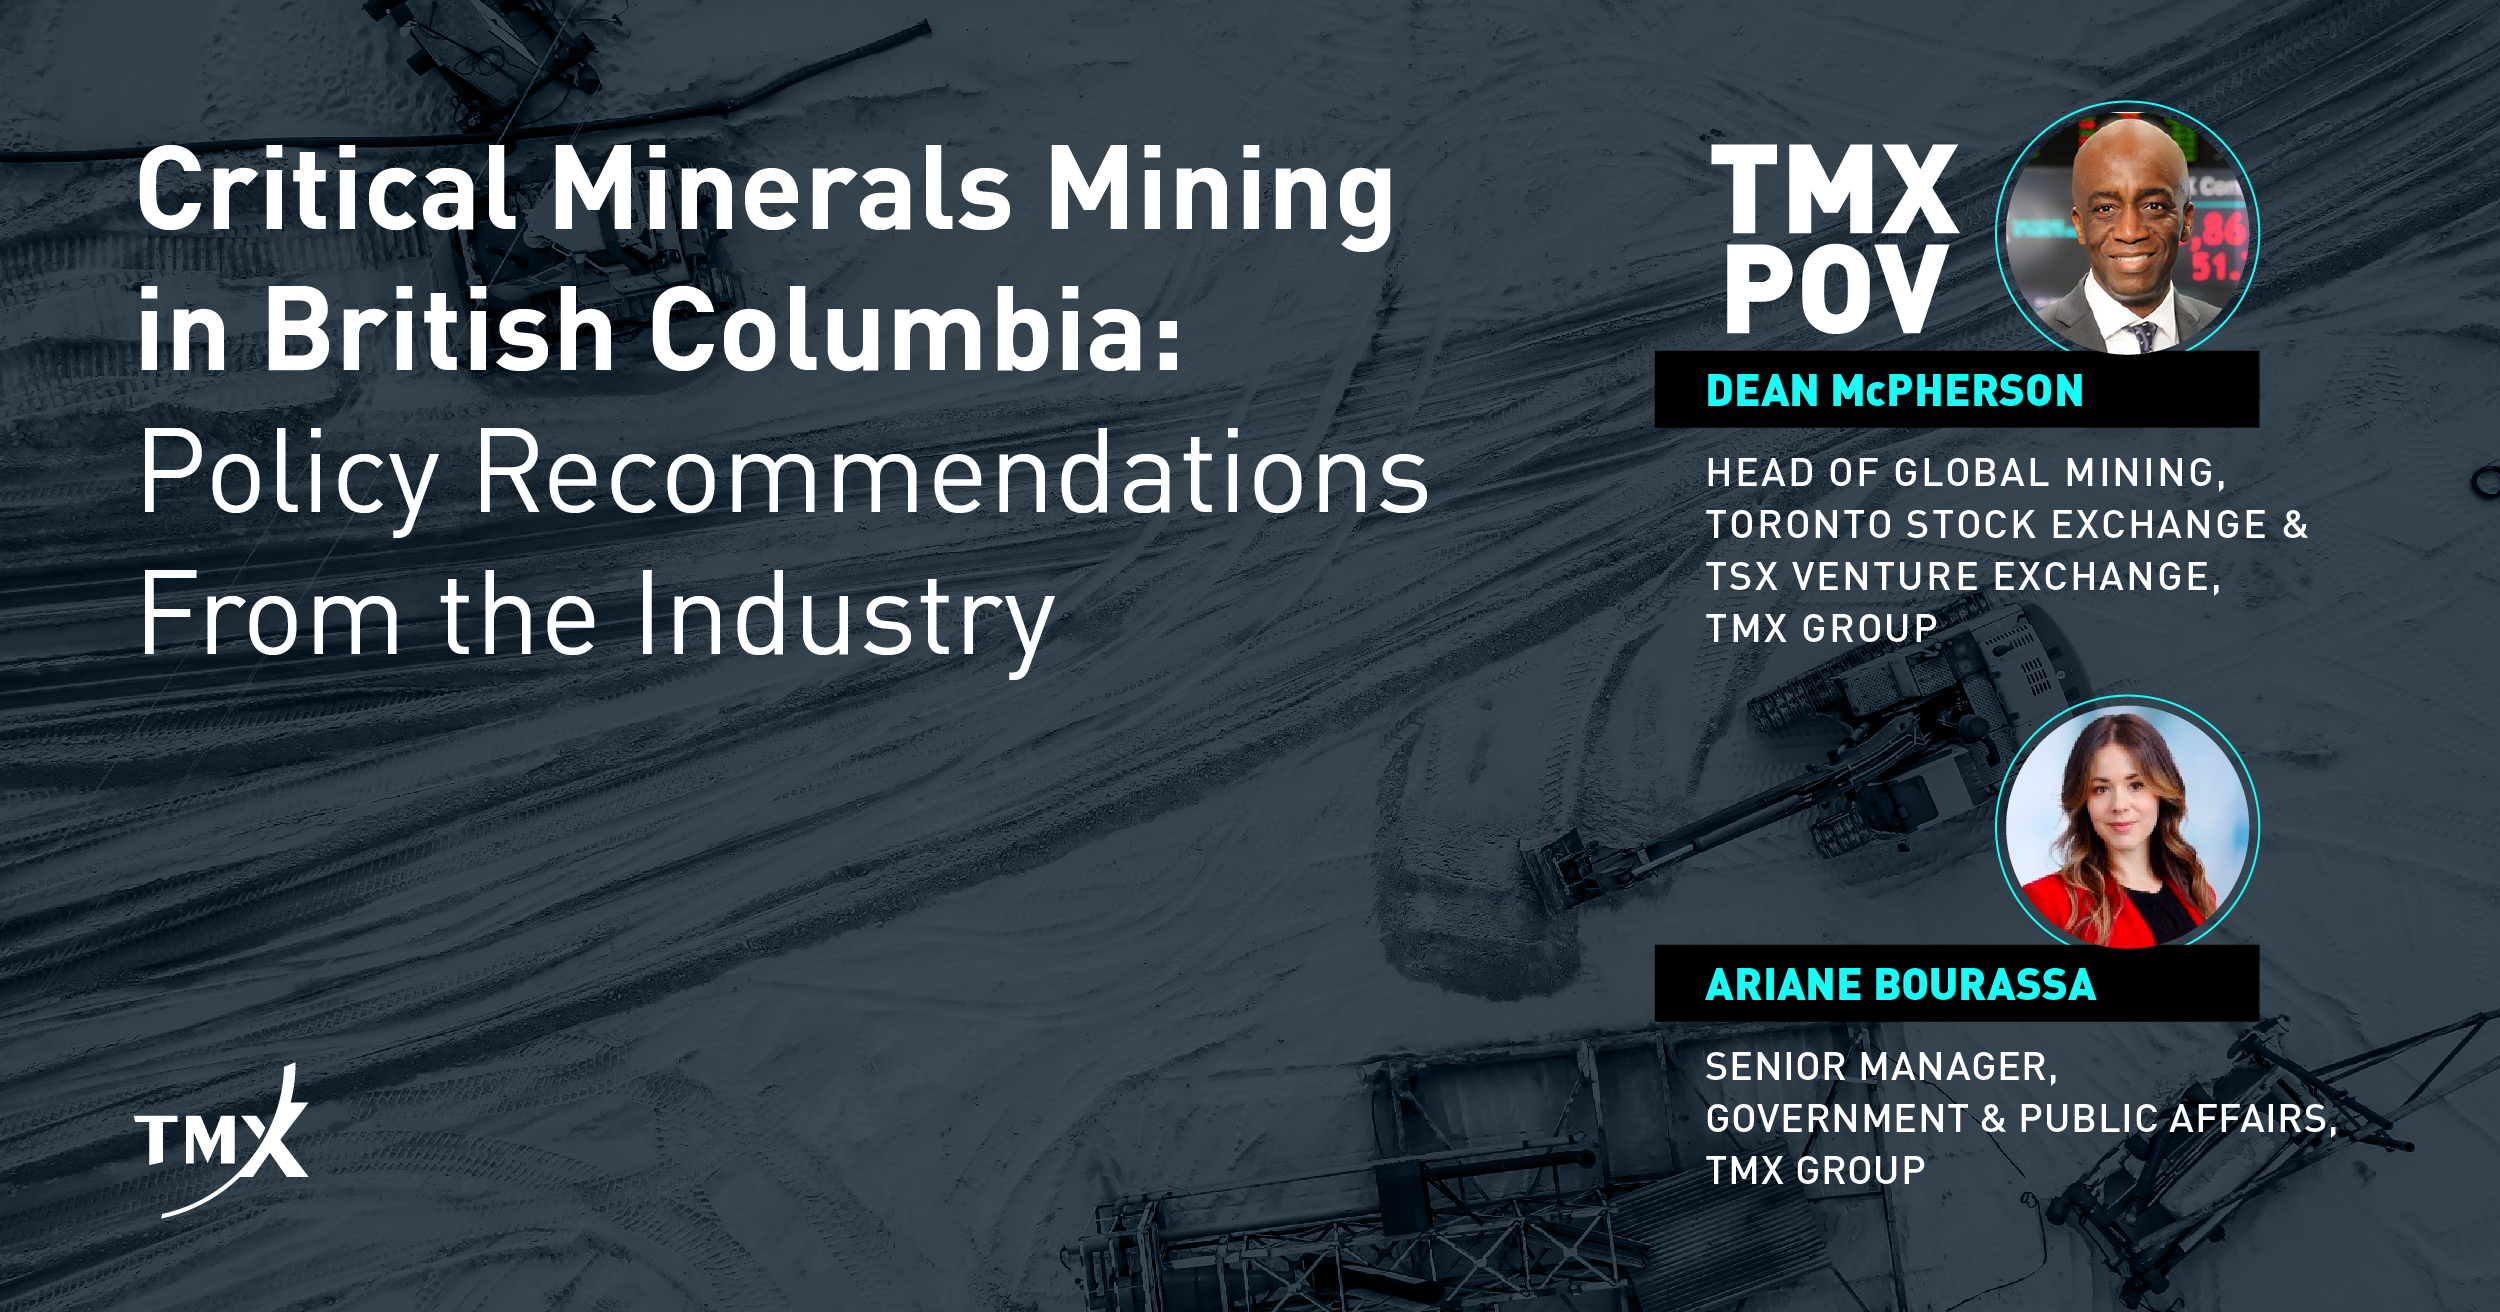 TMX POV - Critical Minerals Mining in B.C.: Policy recommendations from the industry